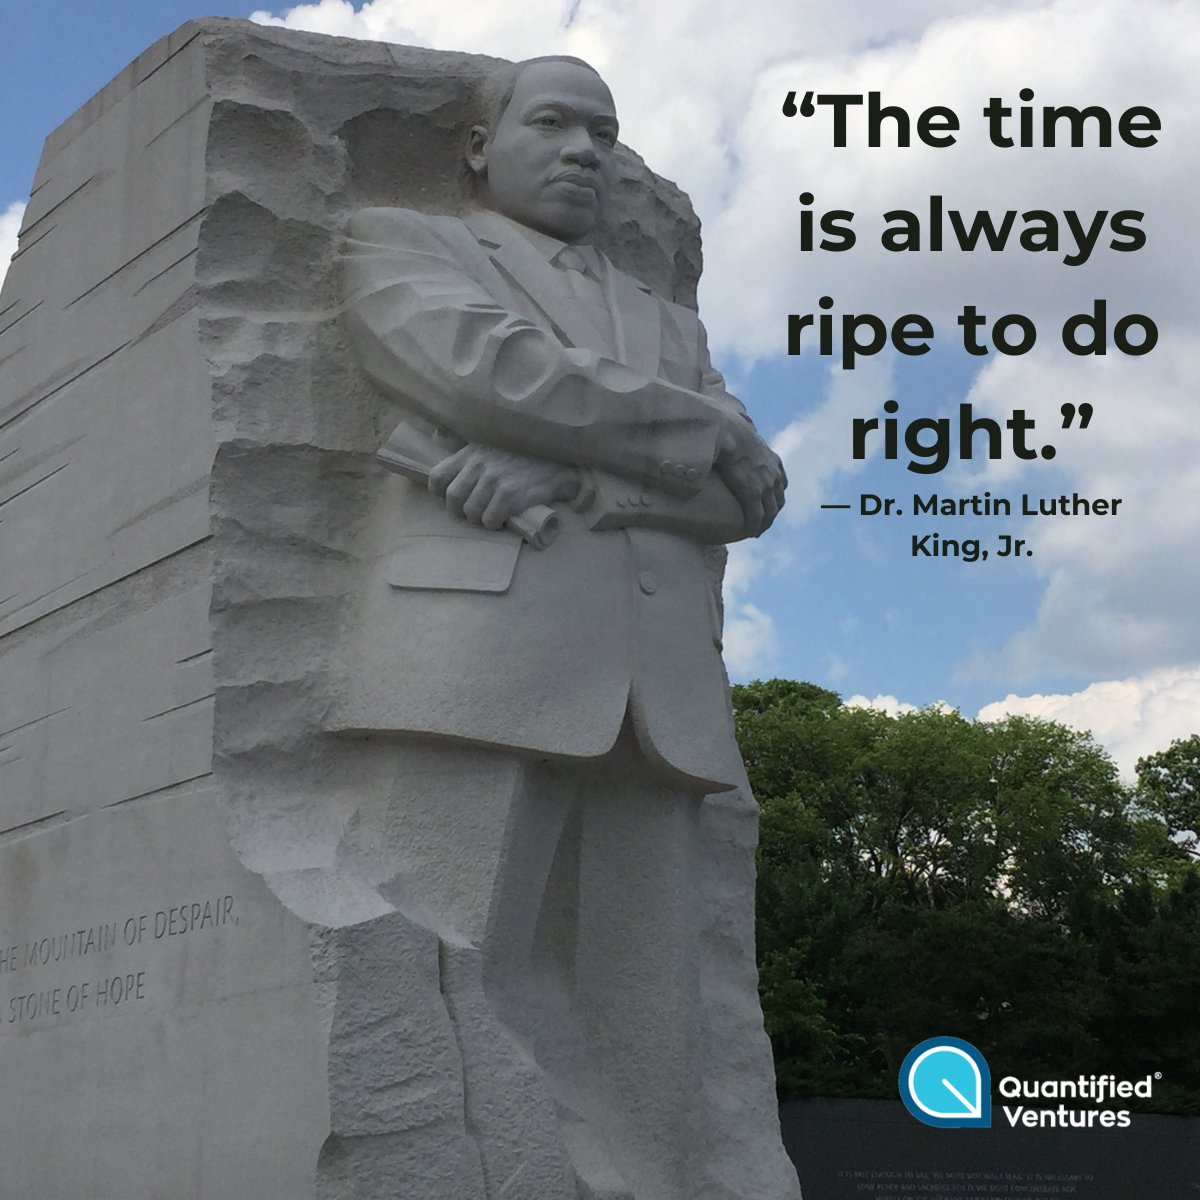 As we celebrate the life of Dr. Martin Luther King Jr. today, may we go beyond mere sound bytes, and remember the truly revolutionary change-maker he was. Take inspiration from his deeds and his words, and focus on the actions we each can take and the impact we all can make.